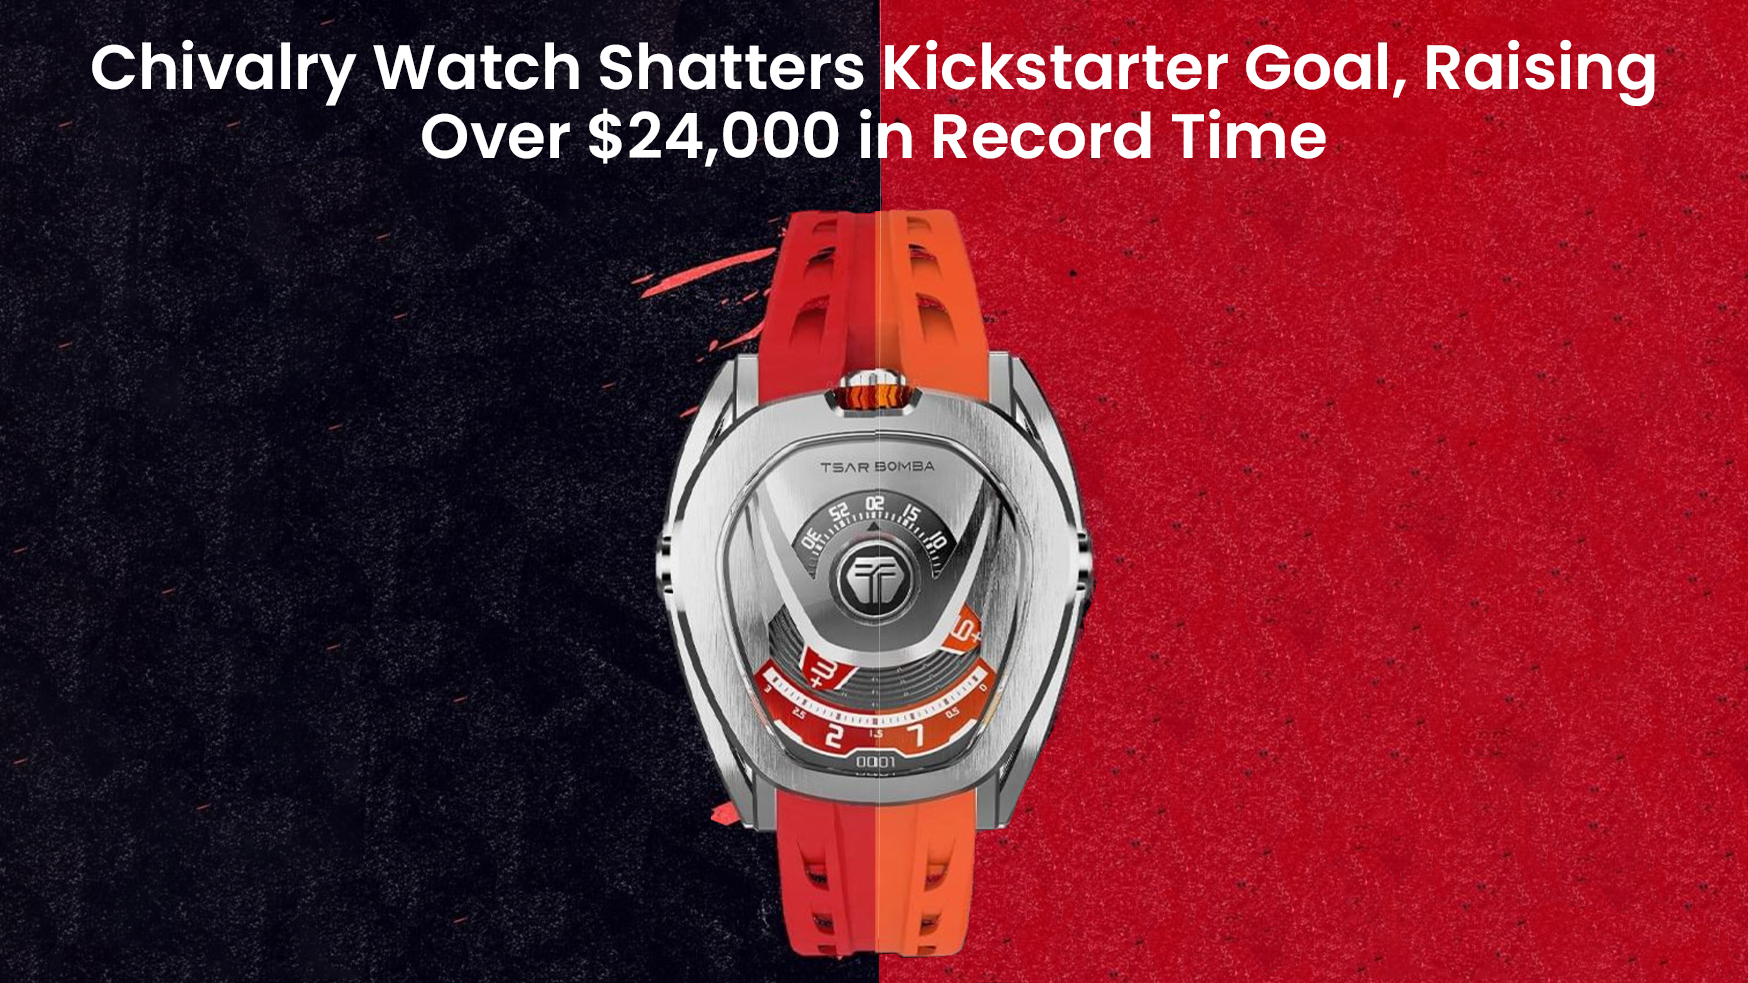 Chivalry Watch Shatters Kickstarter Goal, Raising Over $24,000 in Record Time